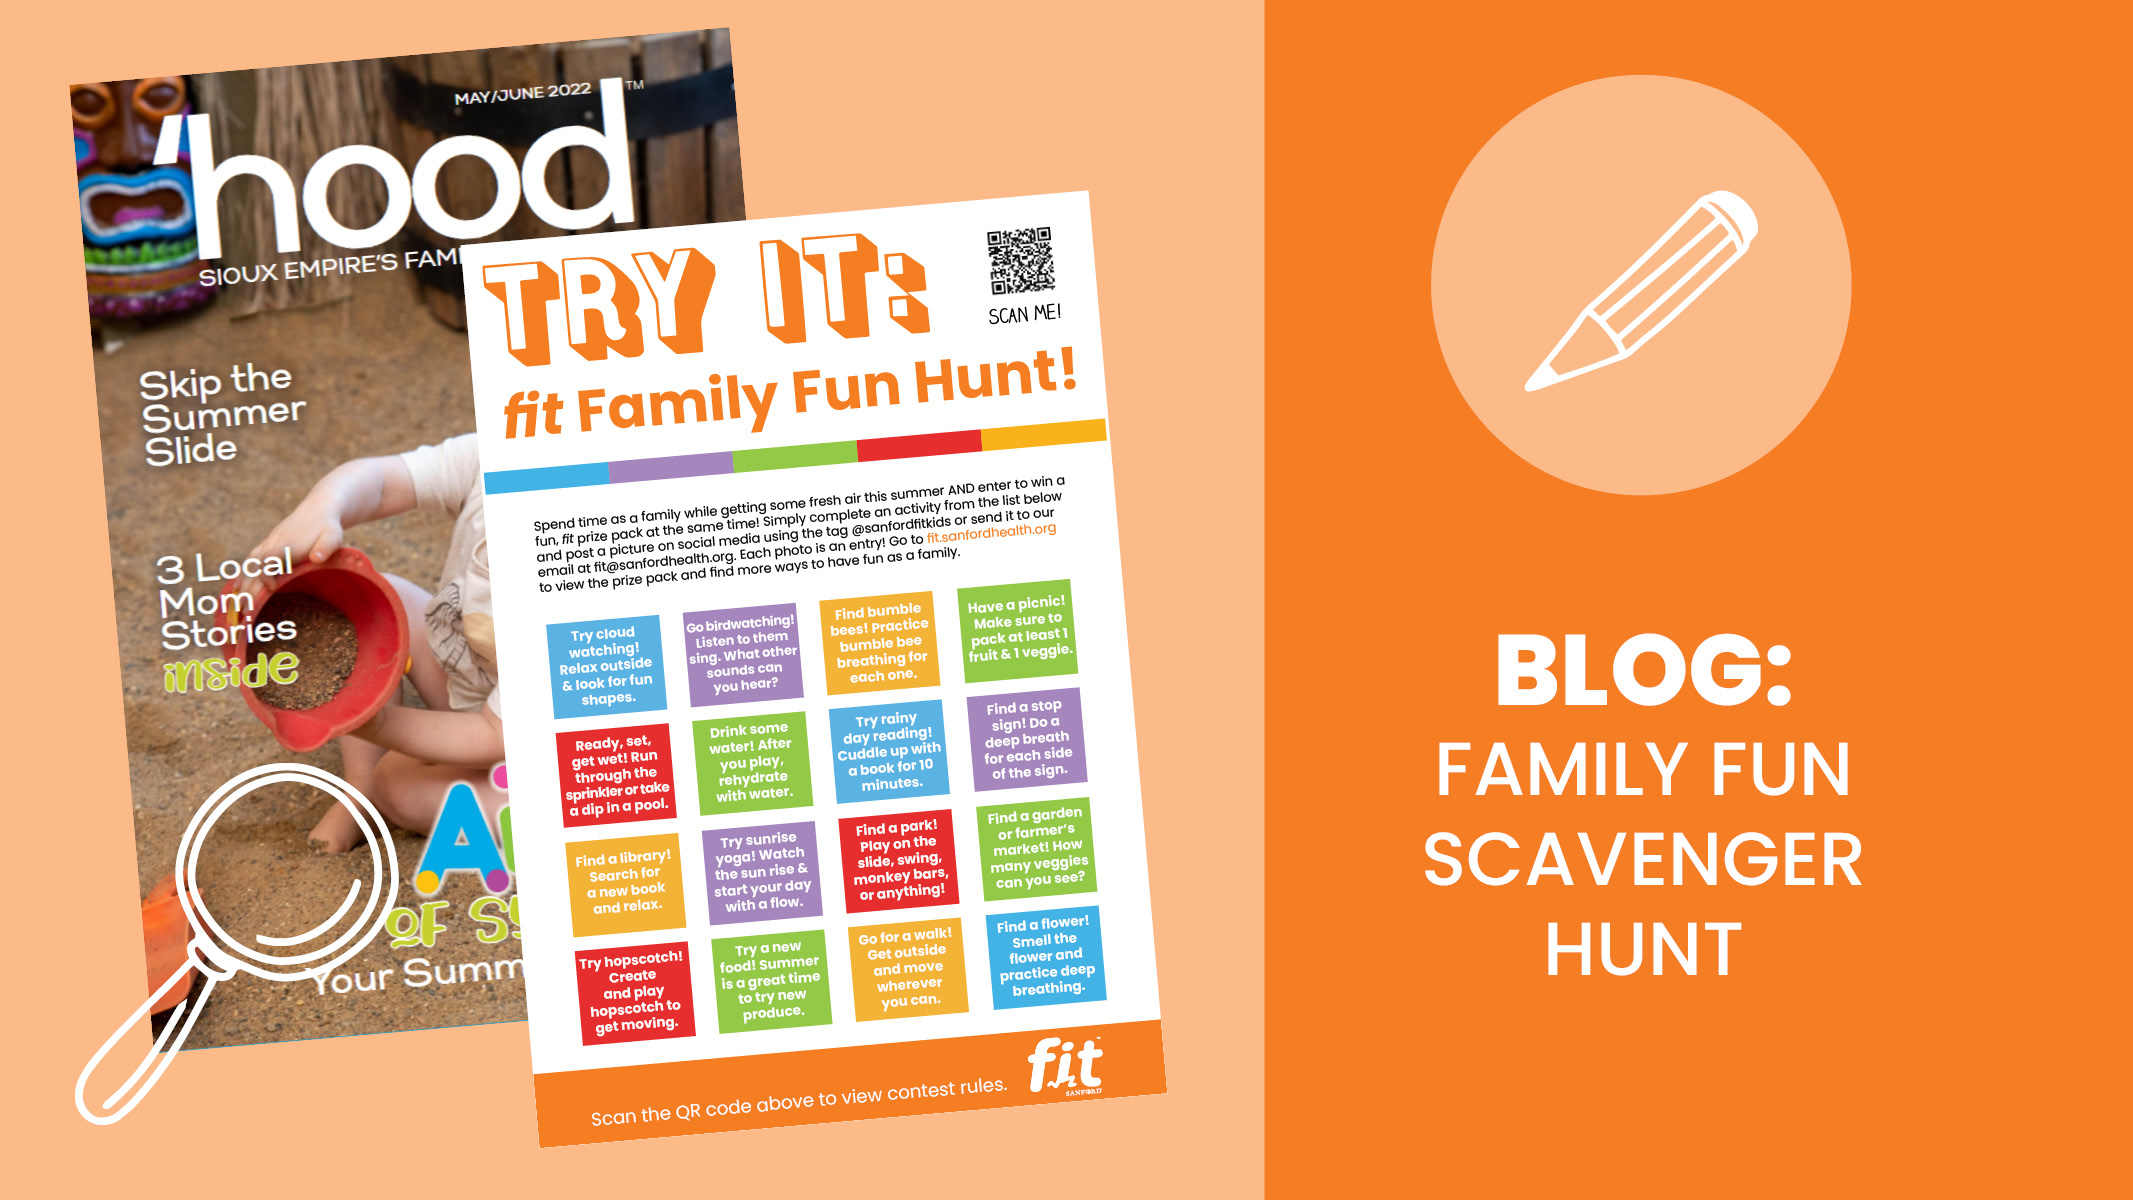 Cover of the 'Hood Magazine with the scavenger hunt list